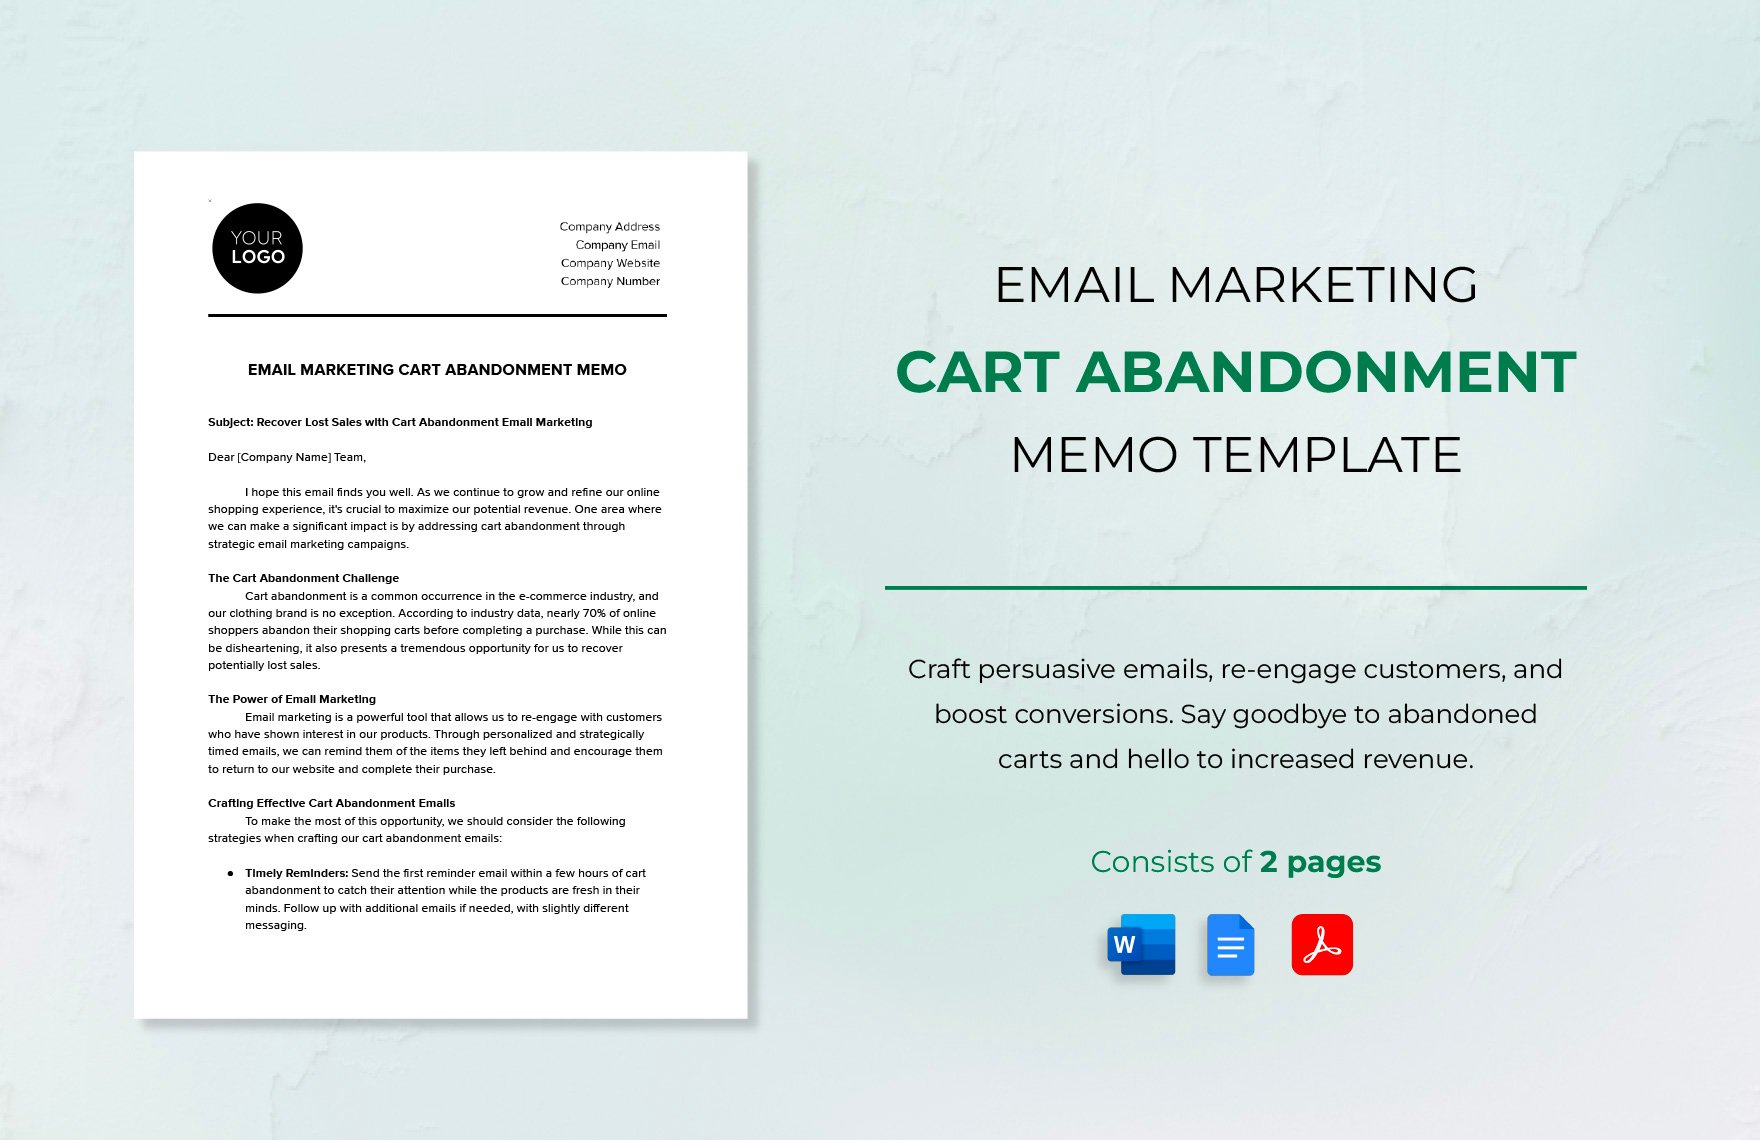 Email Marketing Cart Abandonment Memo Template